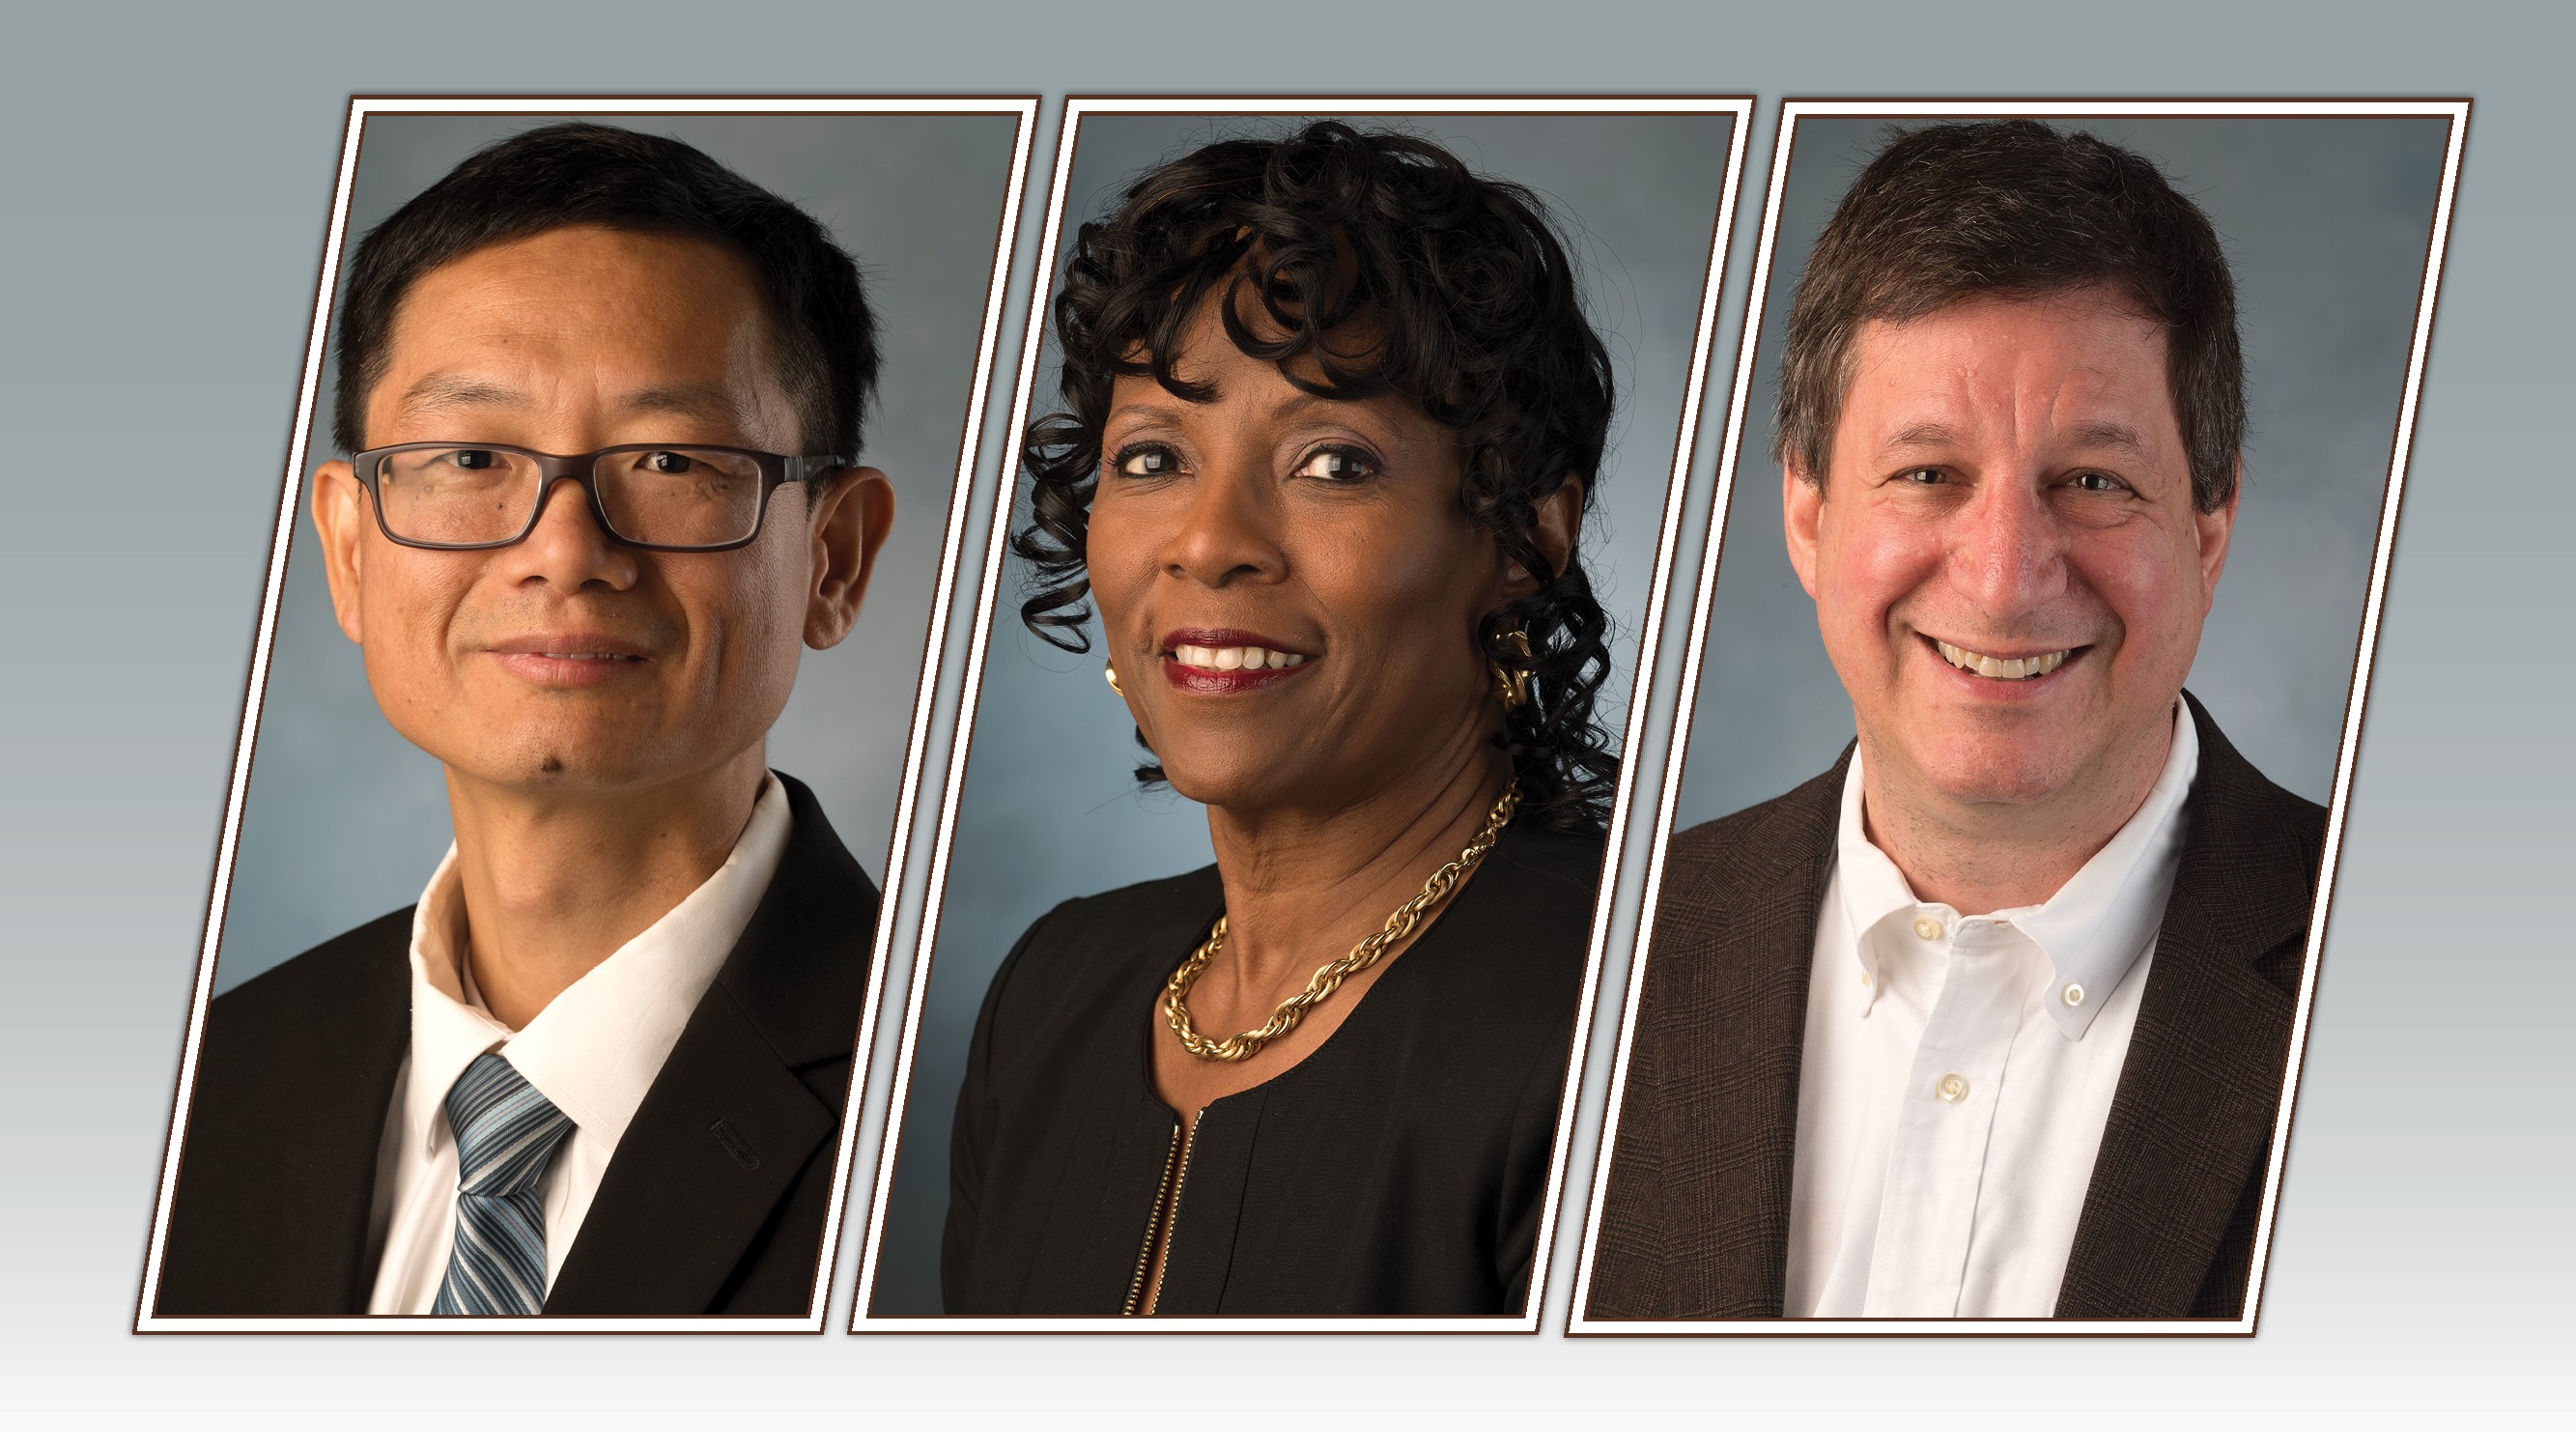 The winners of the 2018 Provost's Awards for Excellence are Mingheng Li, Felicia Friendly Thomas and Alexander Rudolph.